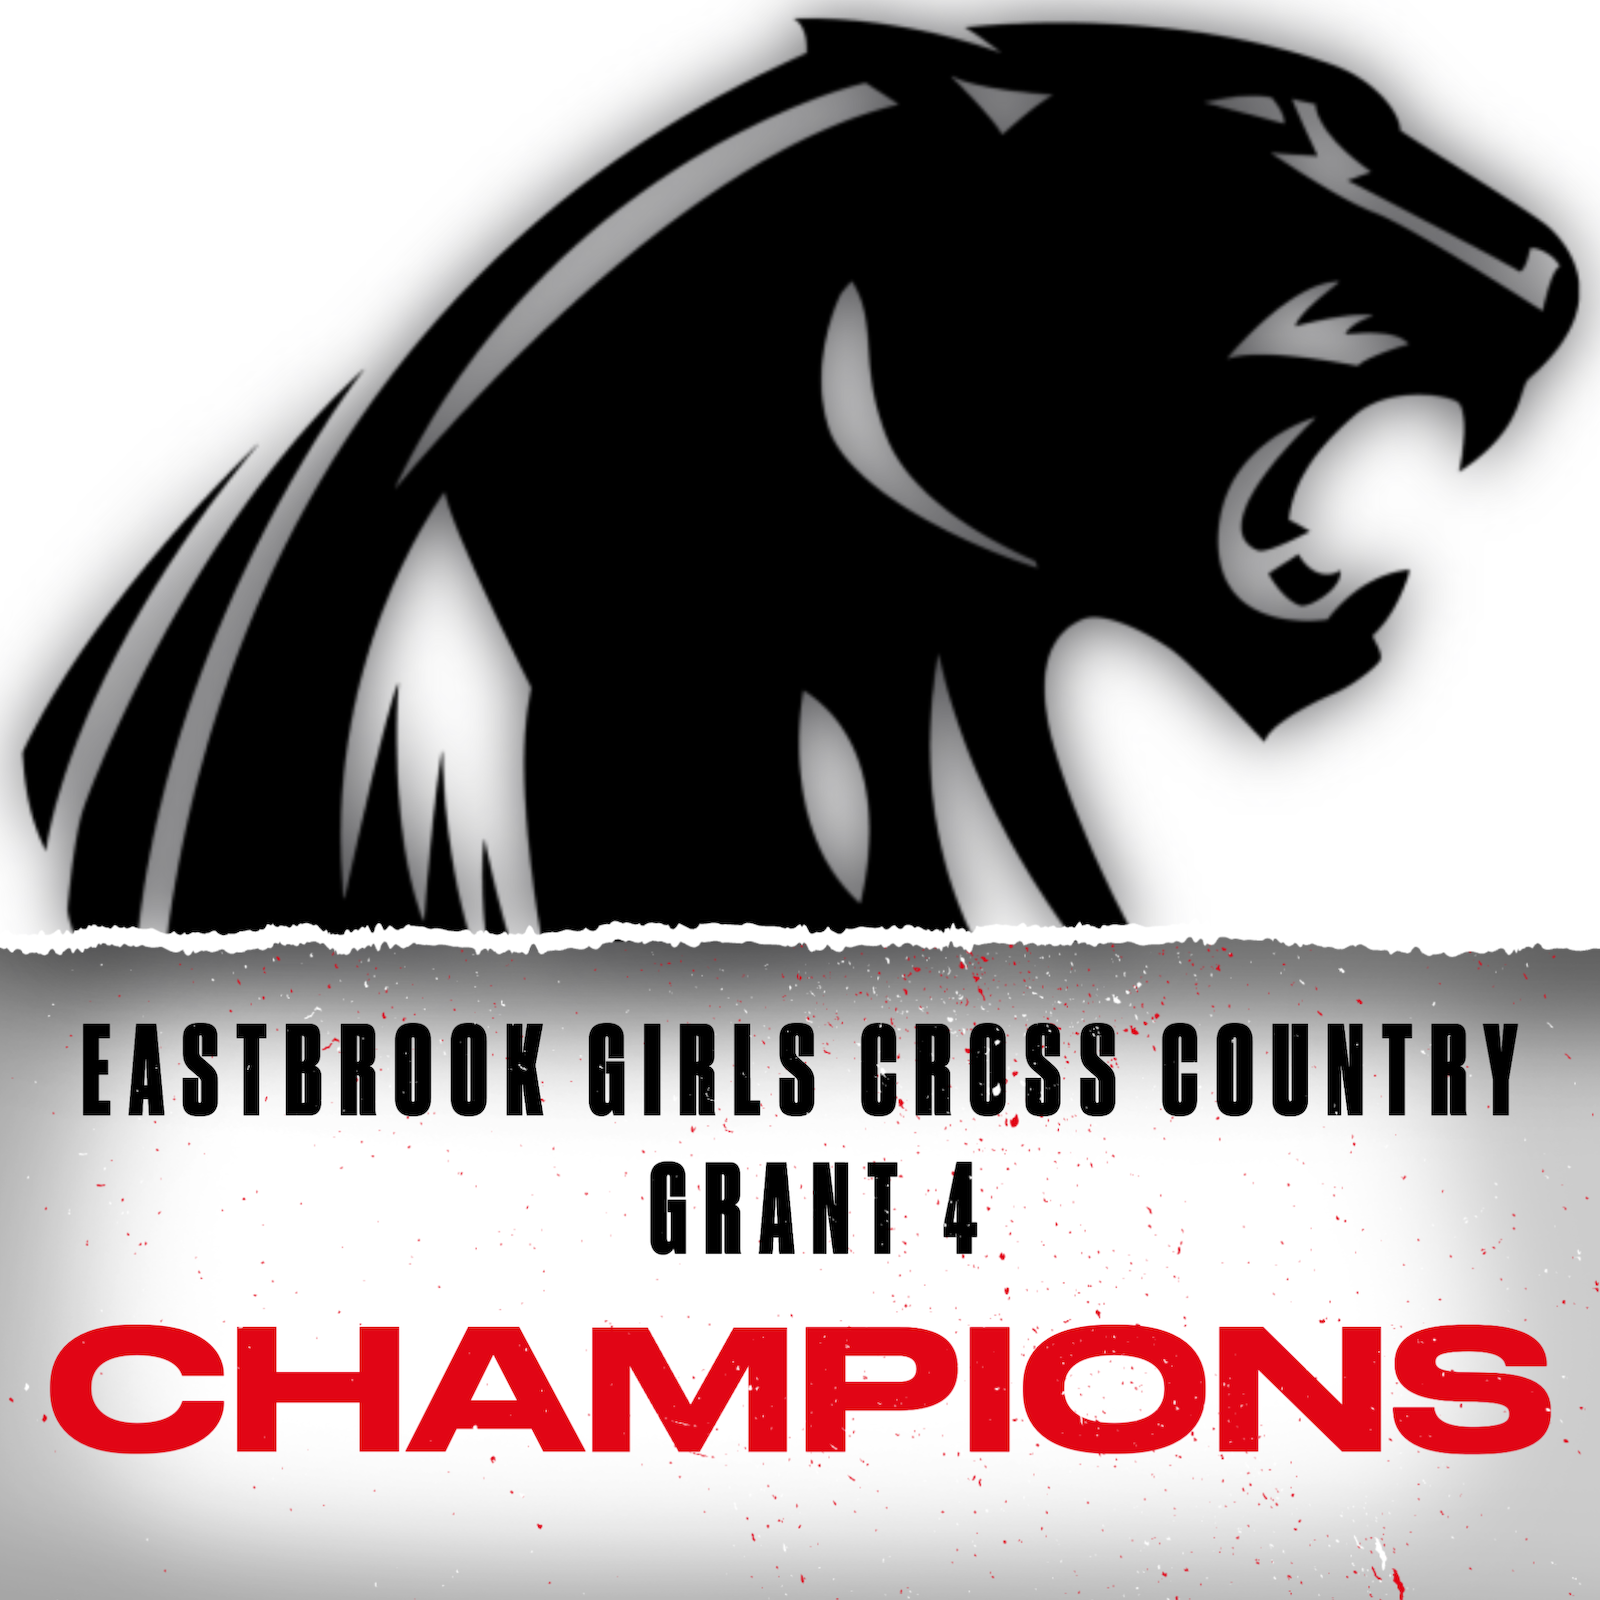 CROSS COUNTRY GRANT 4 CHAMPS 1236707.png